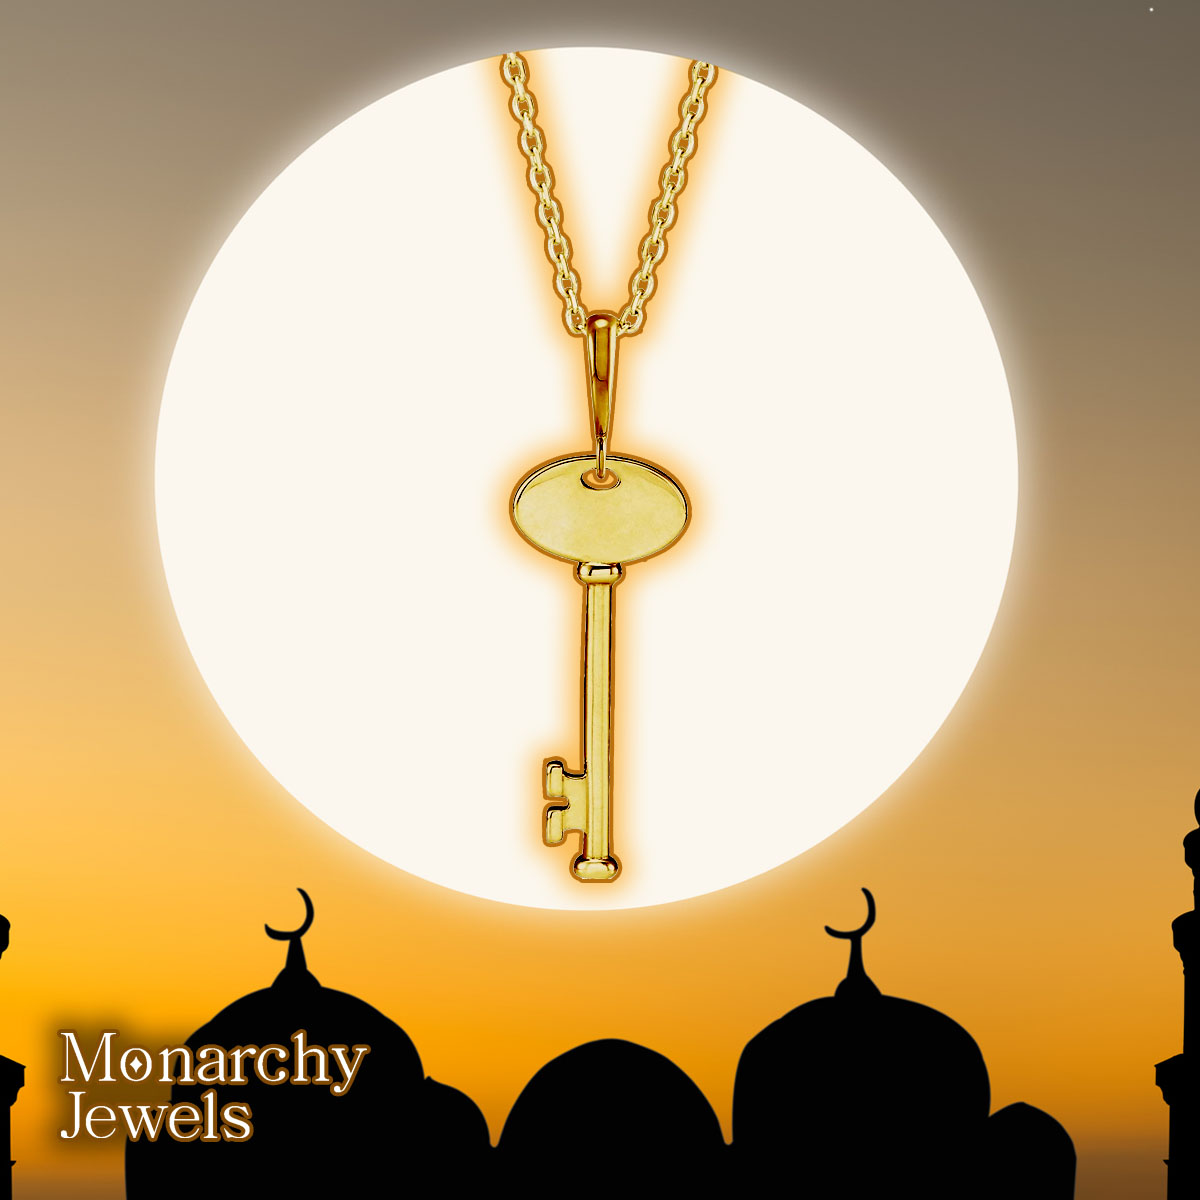 Our Returning Home Necklace is available in Sterling Silver, 14k Yellow Gold, 14k White Gold & 14k Rose Gold. For each piece purchased from the Free Palestine collection, Monarchy Jewels donates a minimum of $75 to a Palestinian family suffering in Gaza. #ReturningHome